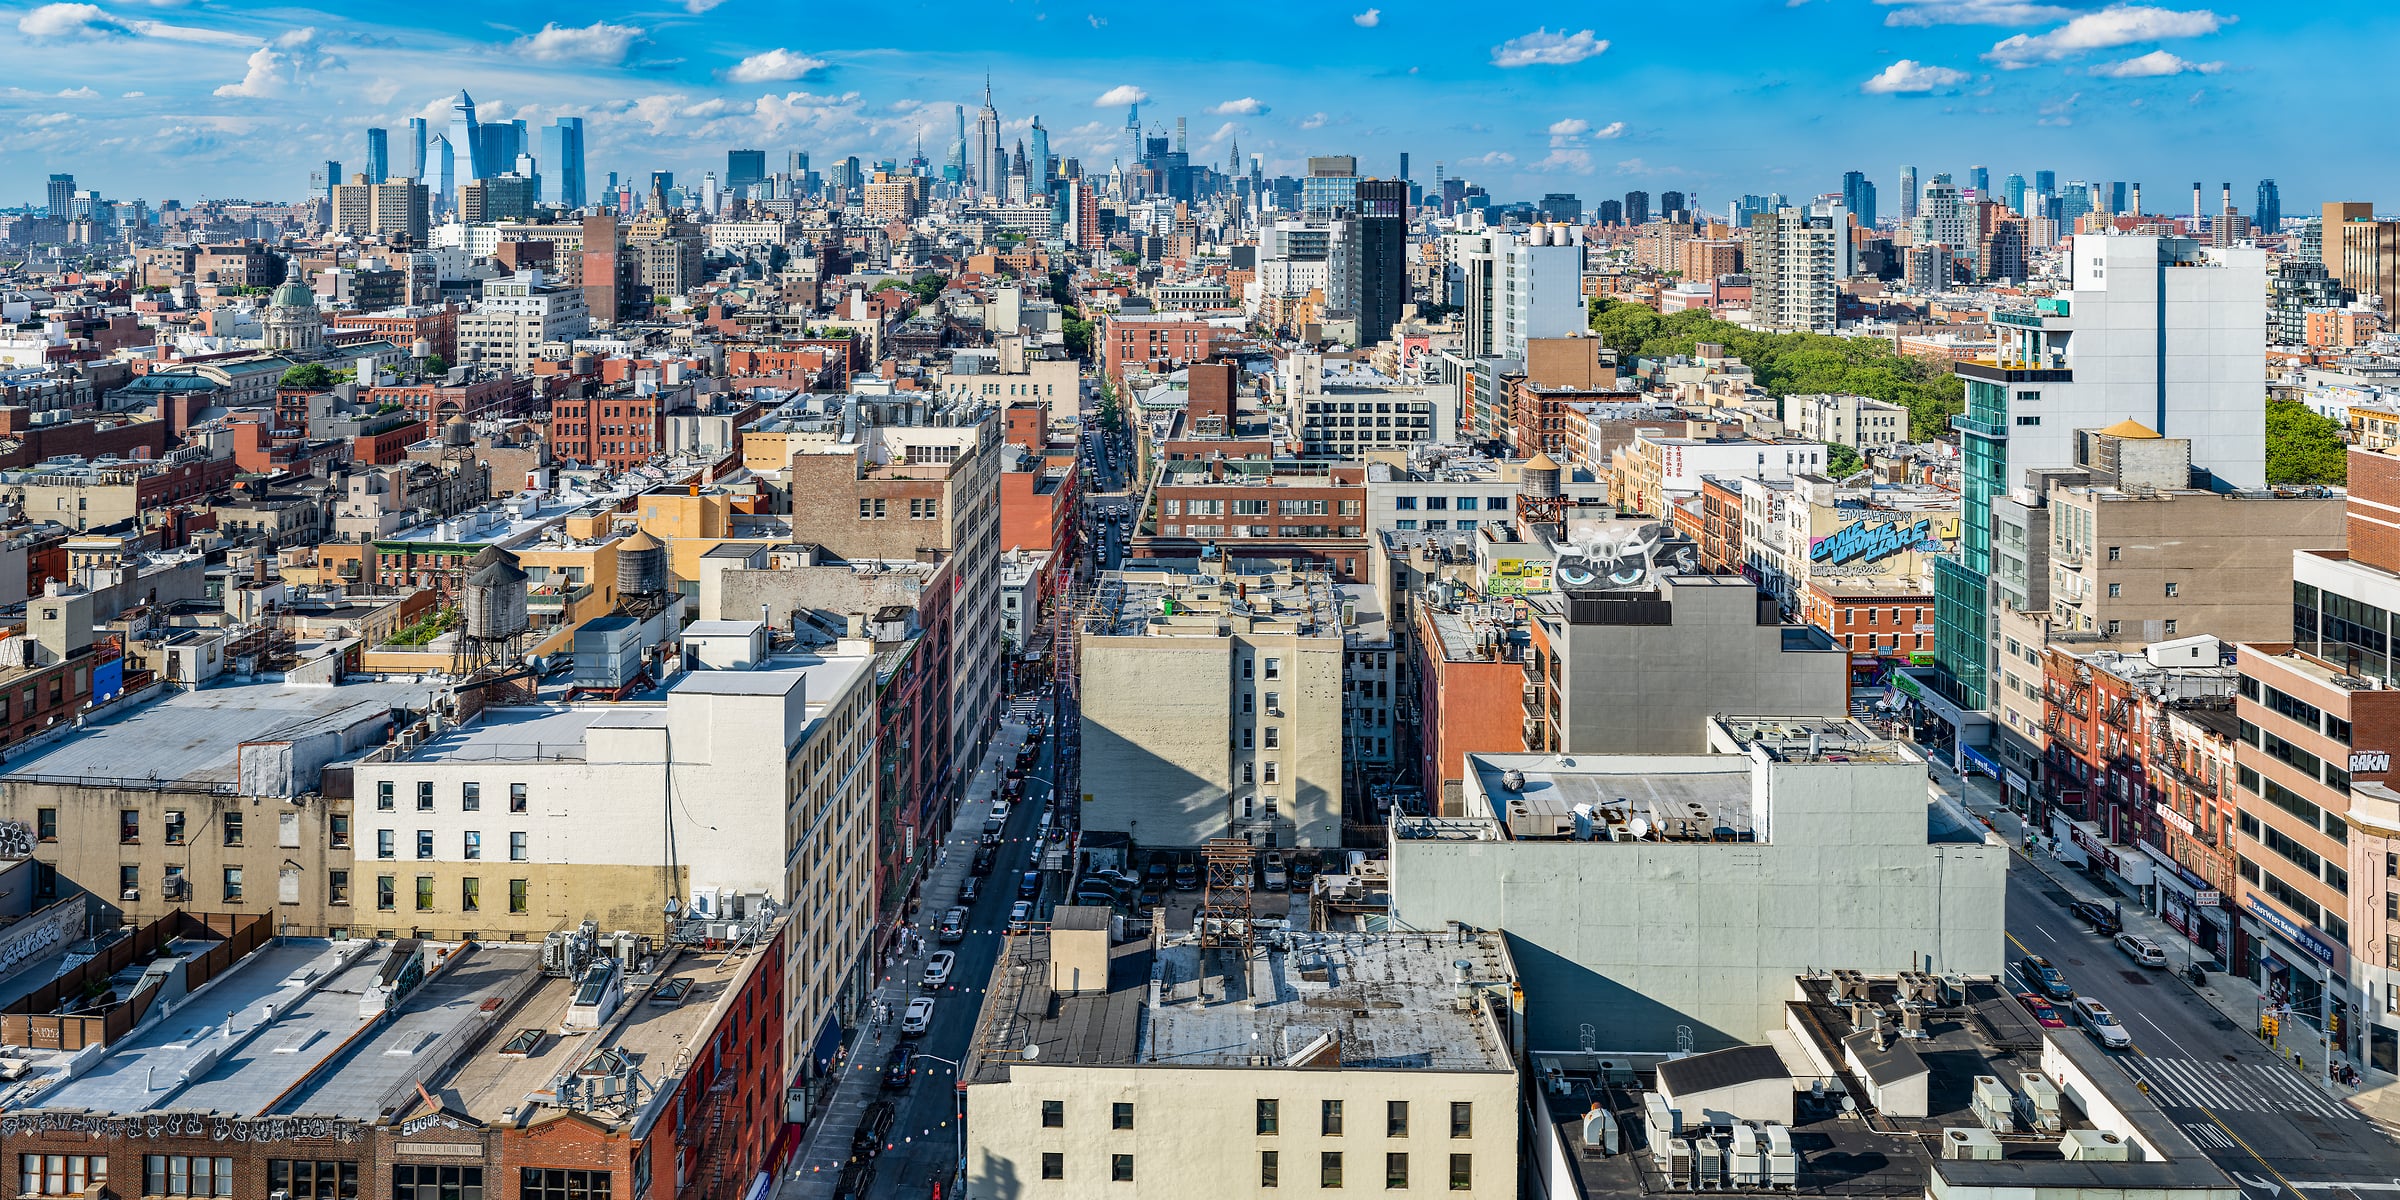 3,078 megapixels! A very high resolution, large-format VAST photo print of the New York City skyline during summer; cityscape photograph created by Tim Lo Monaco from Lower Manhattan, New York City, New York.